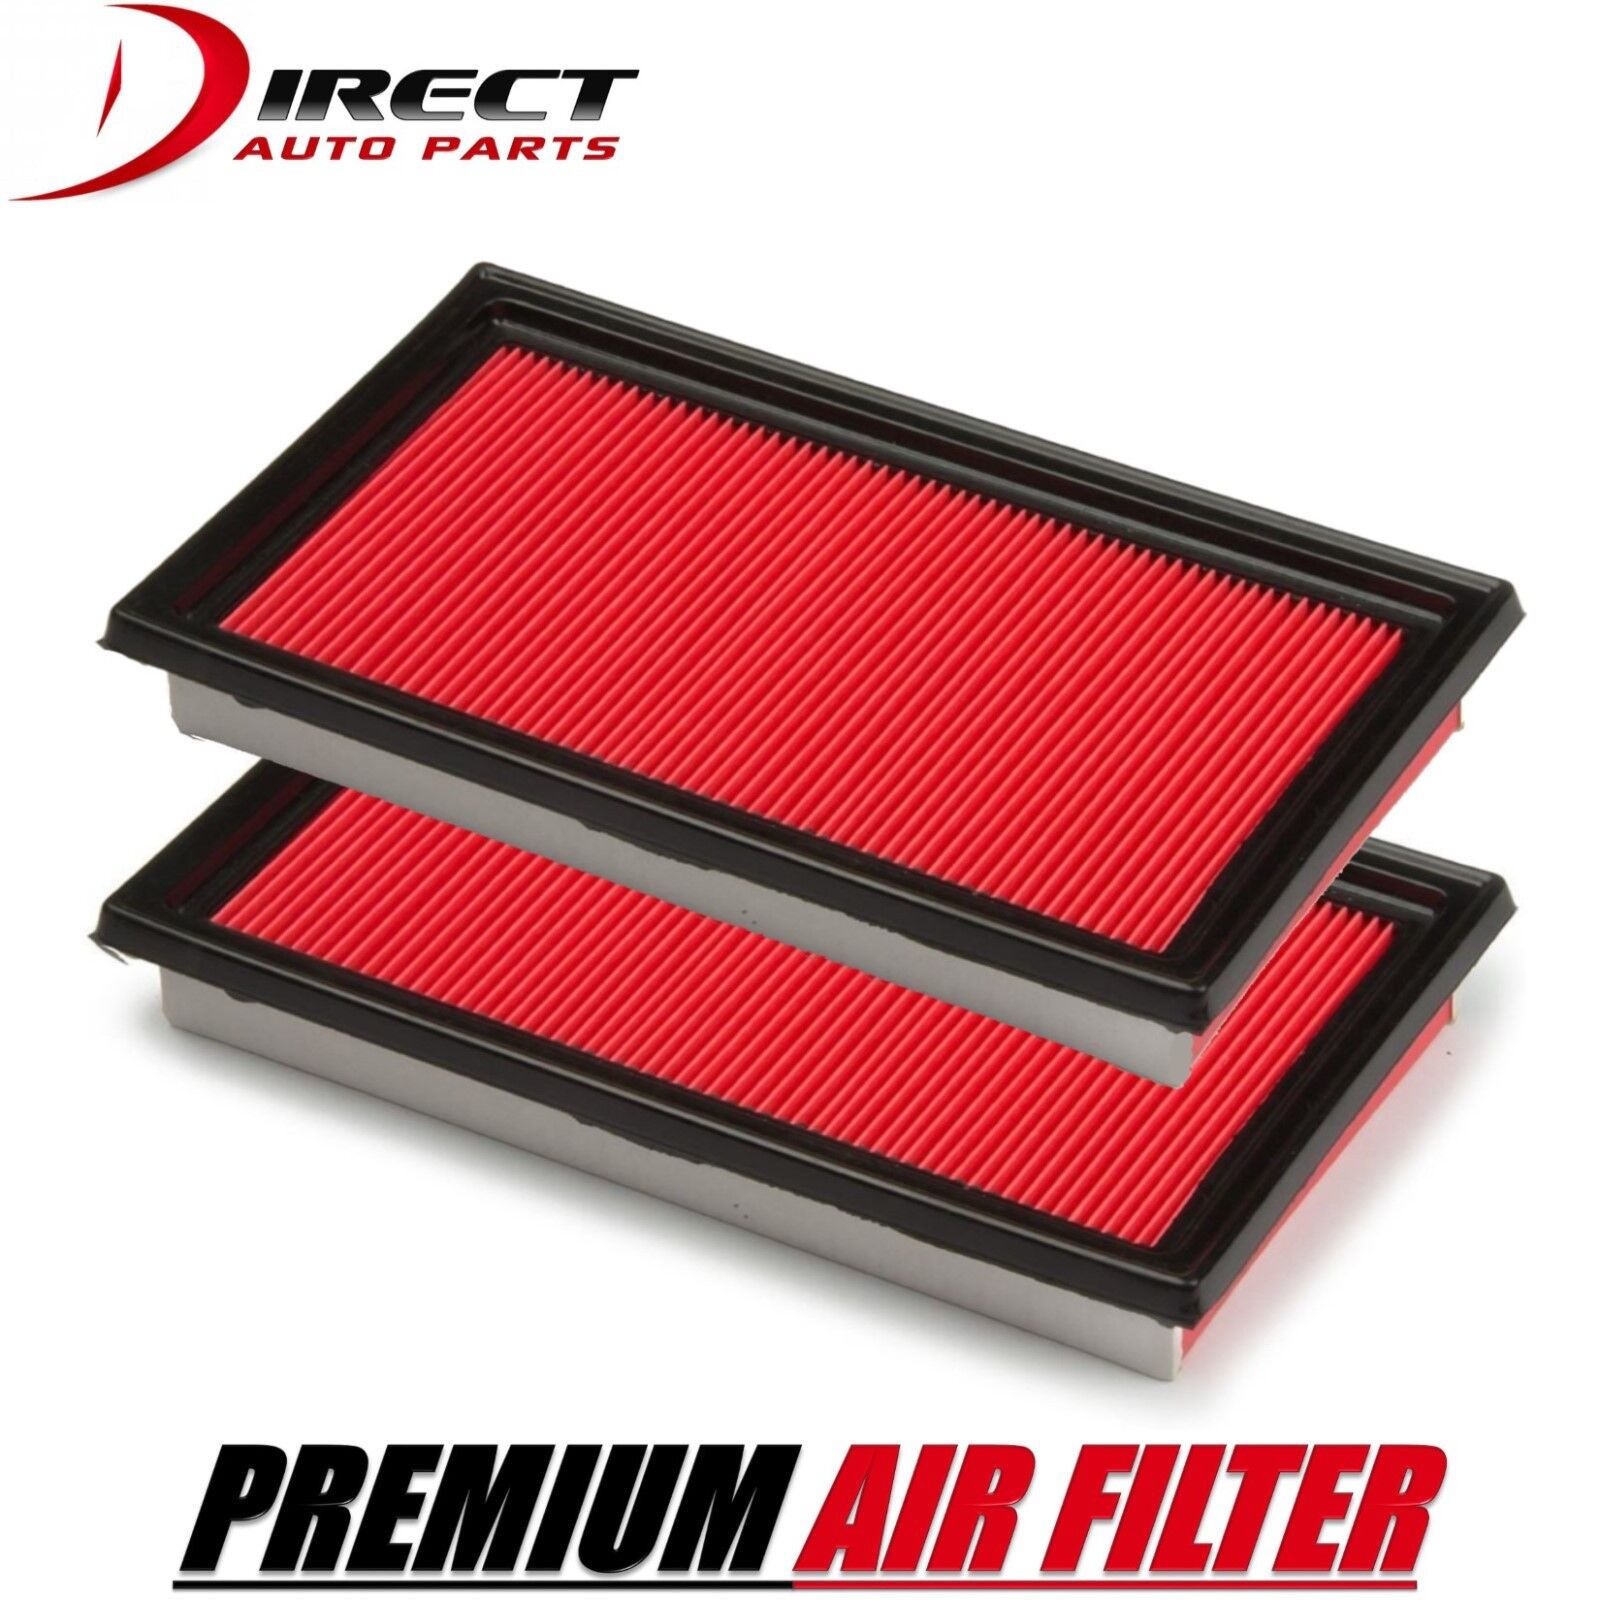 2 AIR FILTER FOR INFINITI FITS G37 V6 - 3.7L ENGINE 2013 - 2008